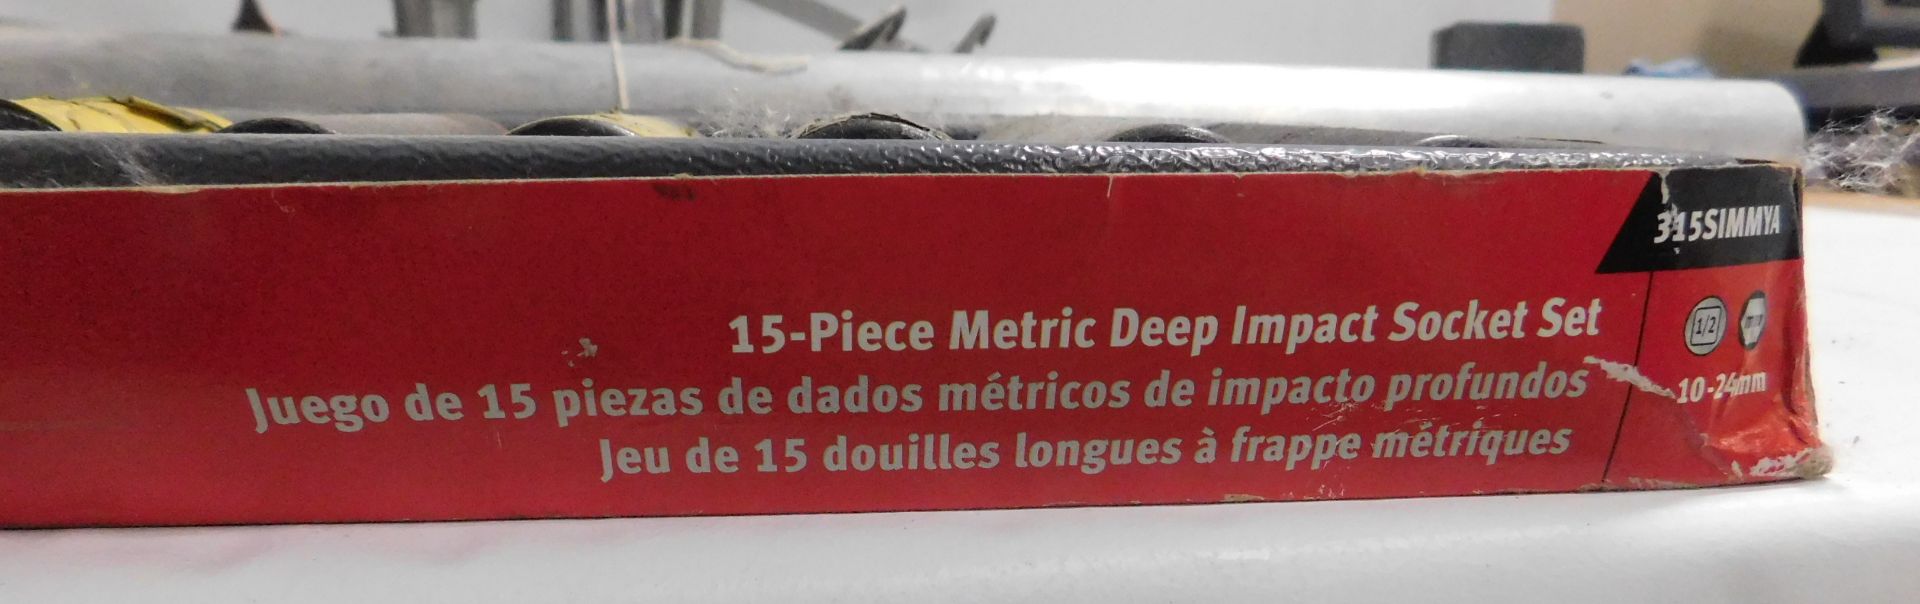 Snap-On 15 Piece Metric Deep Impact Socket Set (Location: Brentwood. Please Refer to General Notes) - Image 4 of 4